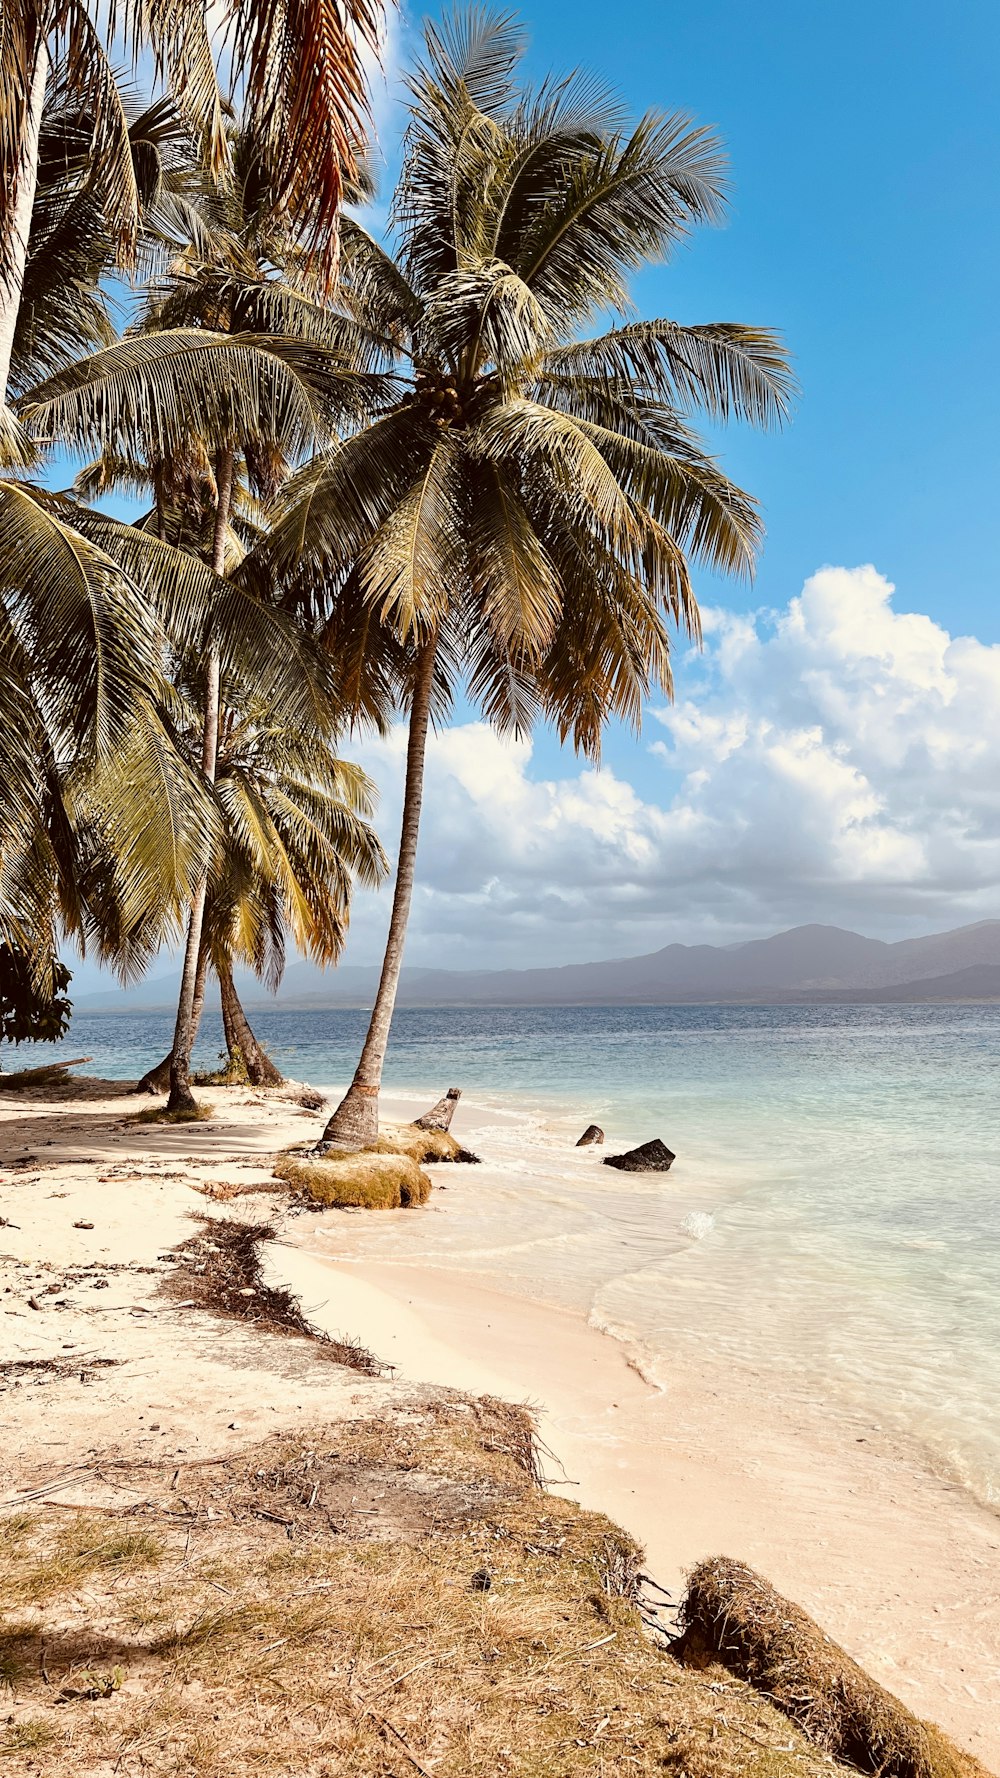 a sandy beach with palm trees on the shore